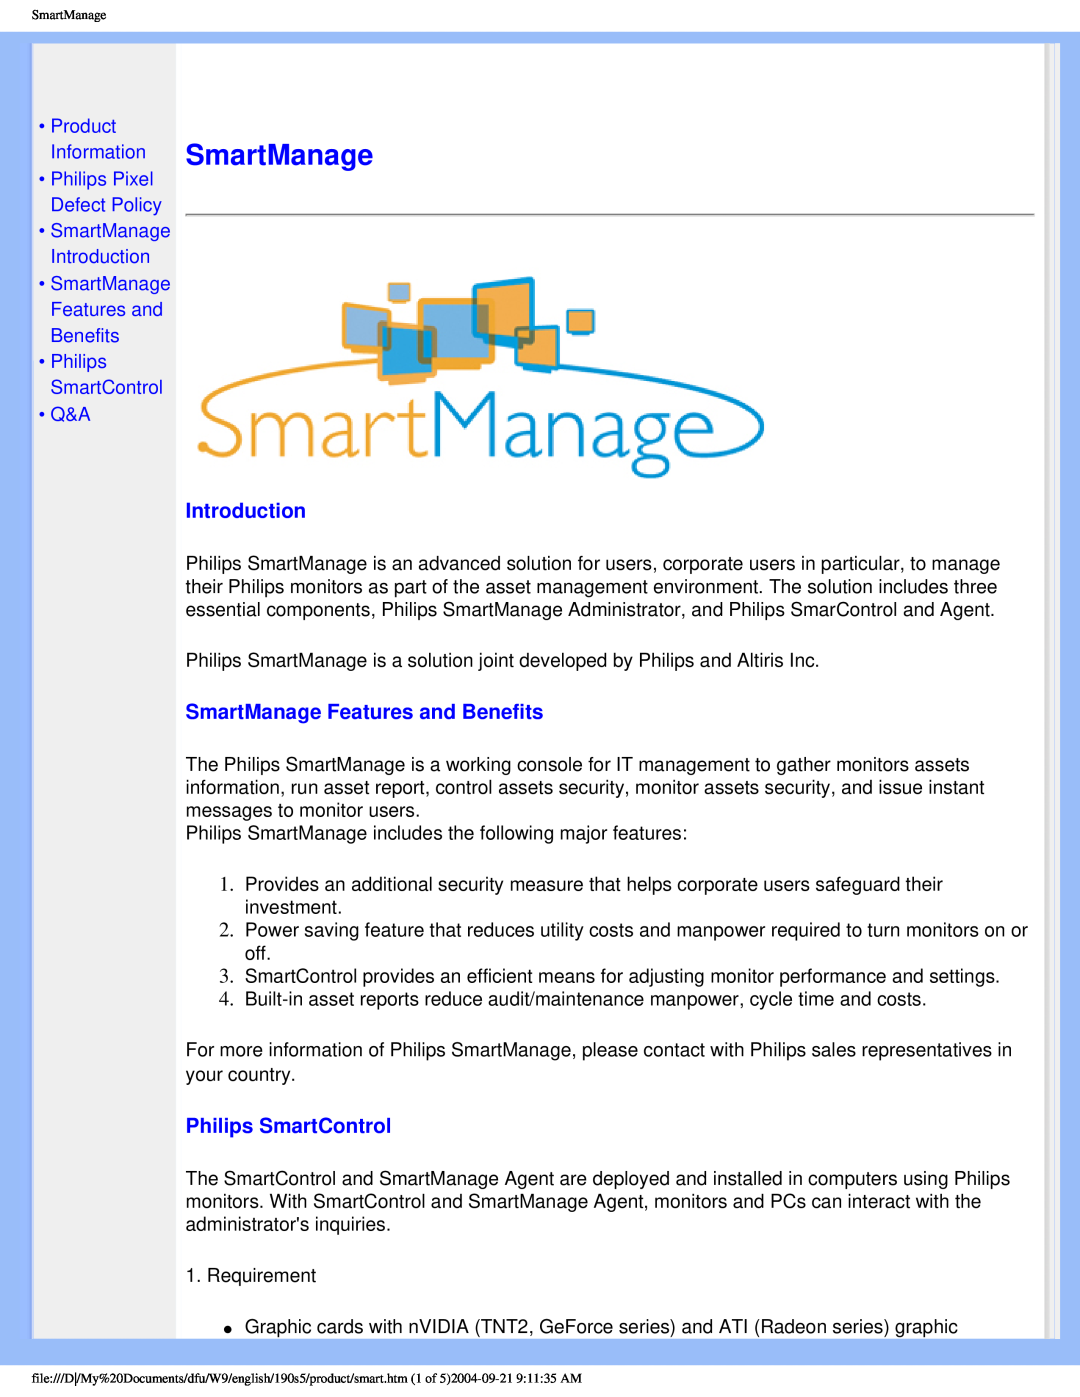 Philips 190S5 user manual SmartManage Features and Benefits, Philips SmartControl, SmartManage Introduction 